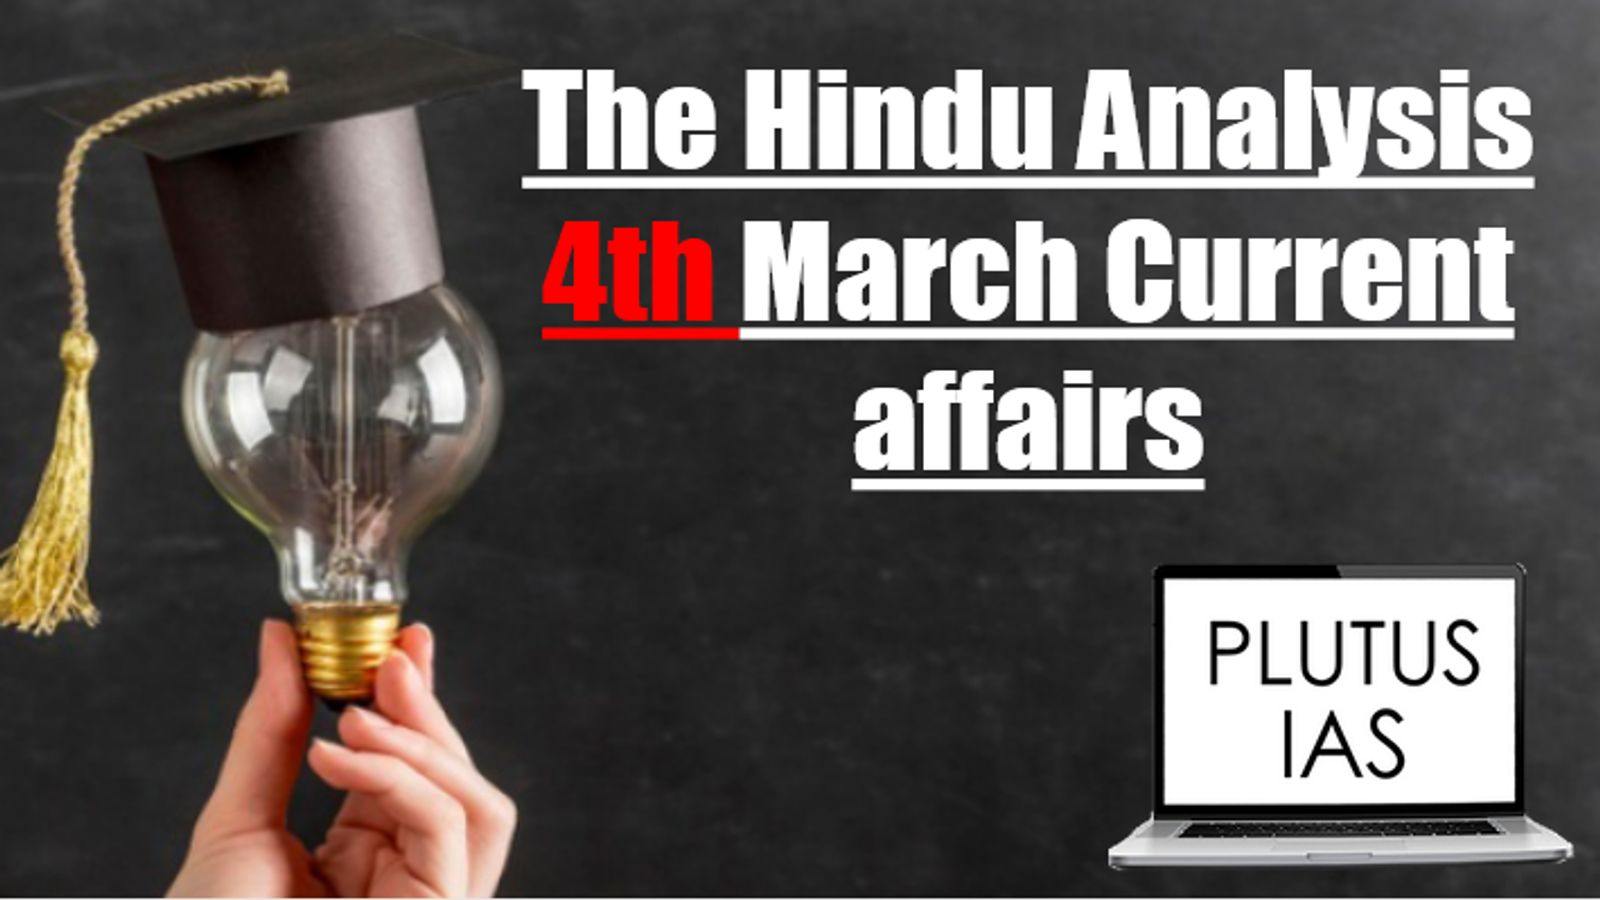 The Hindu Analysis 4th March